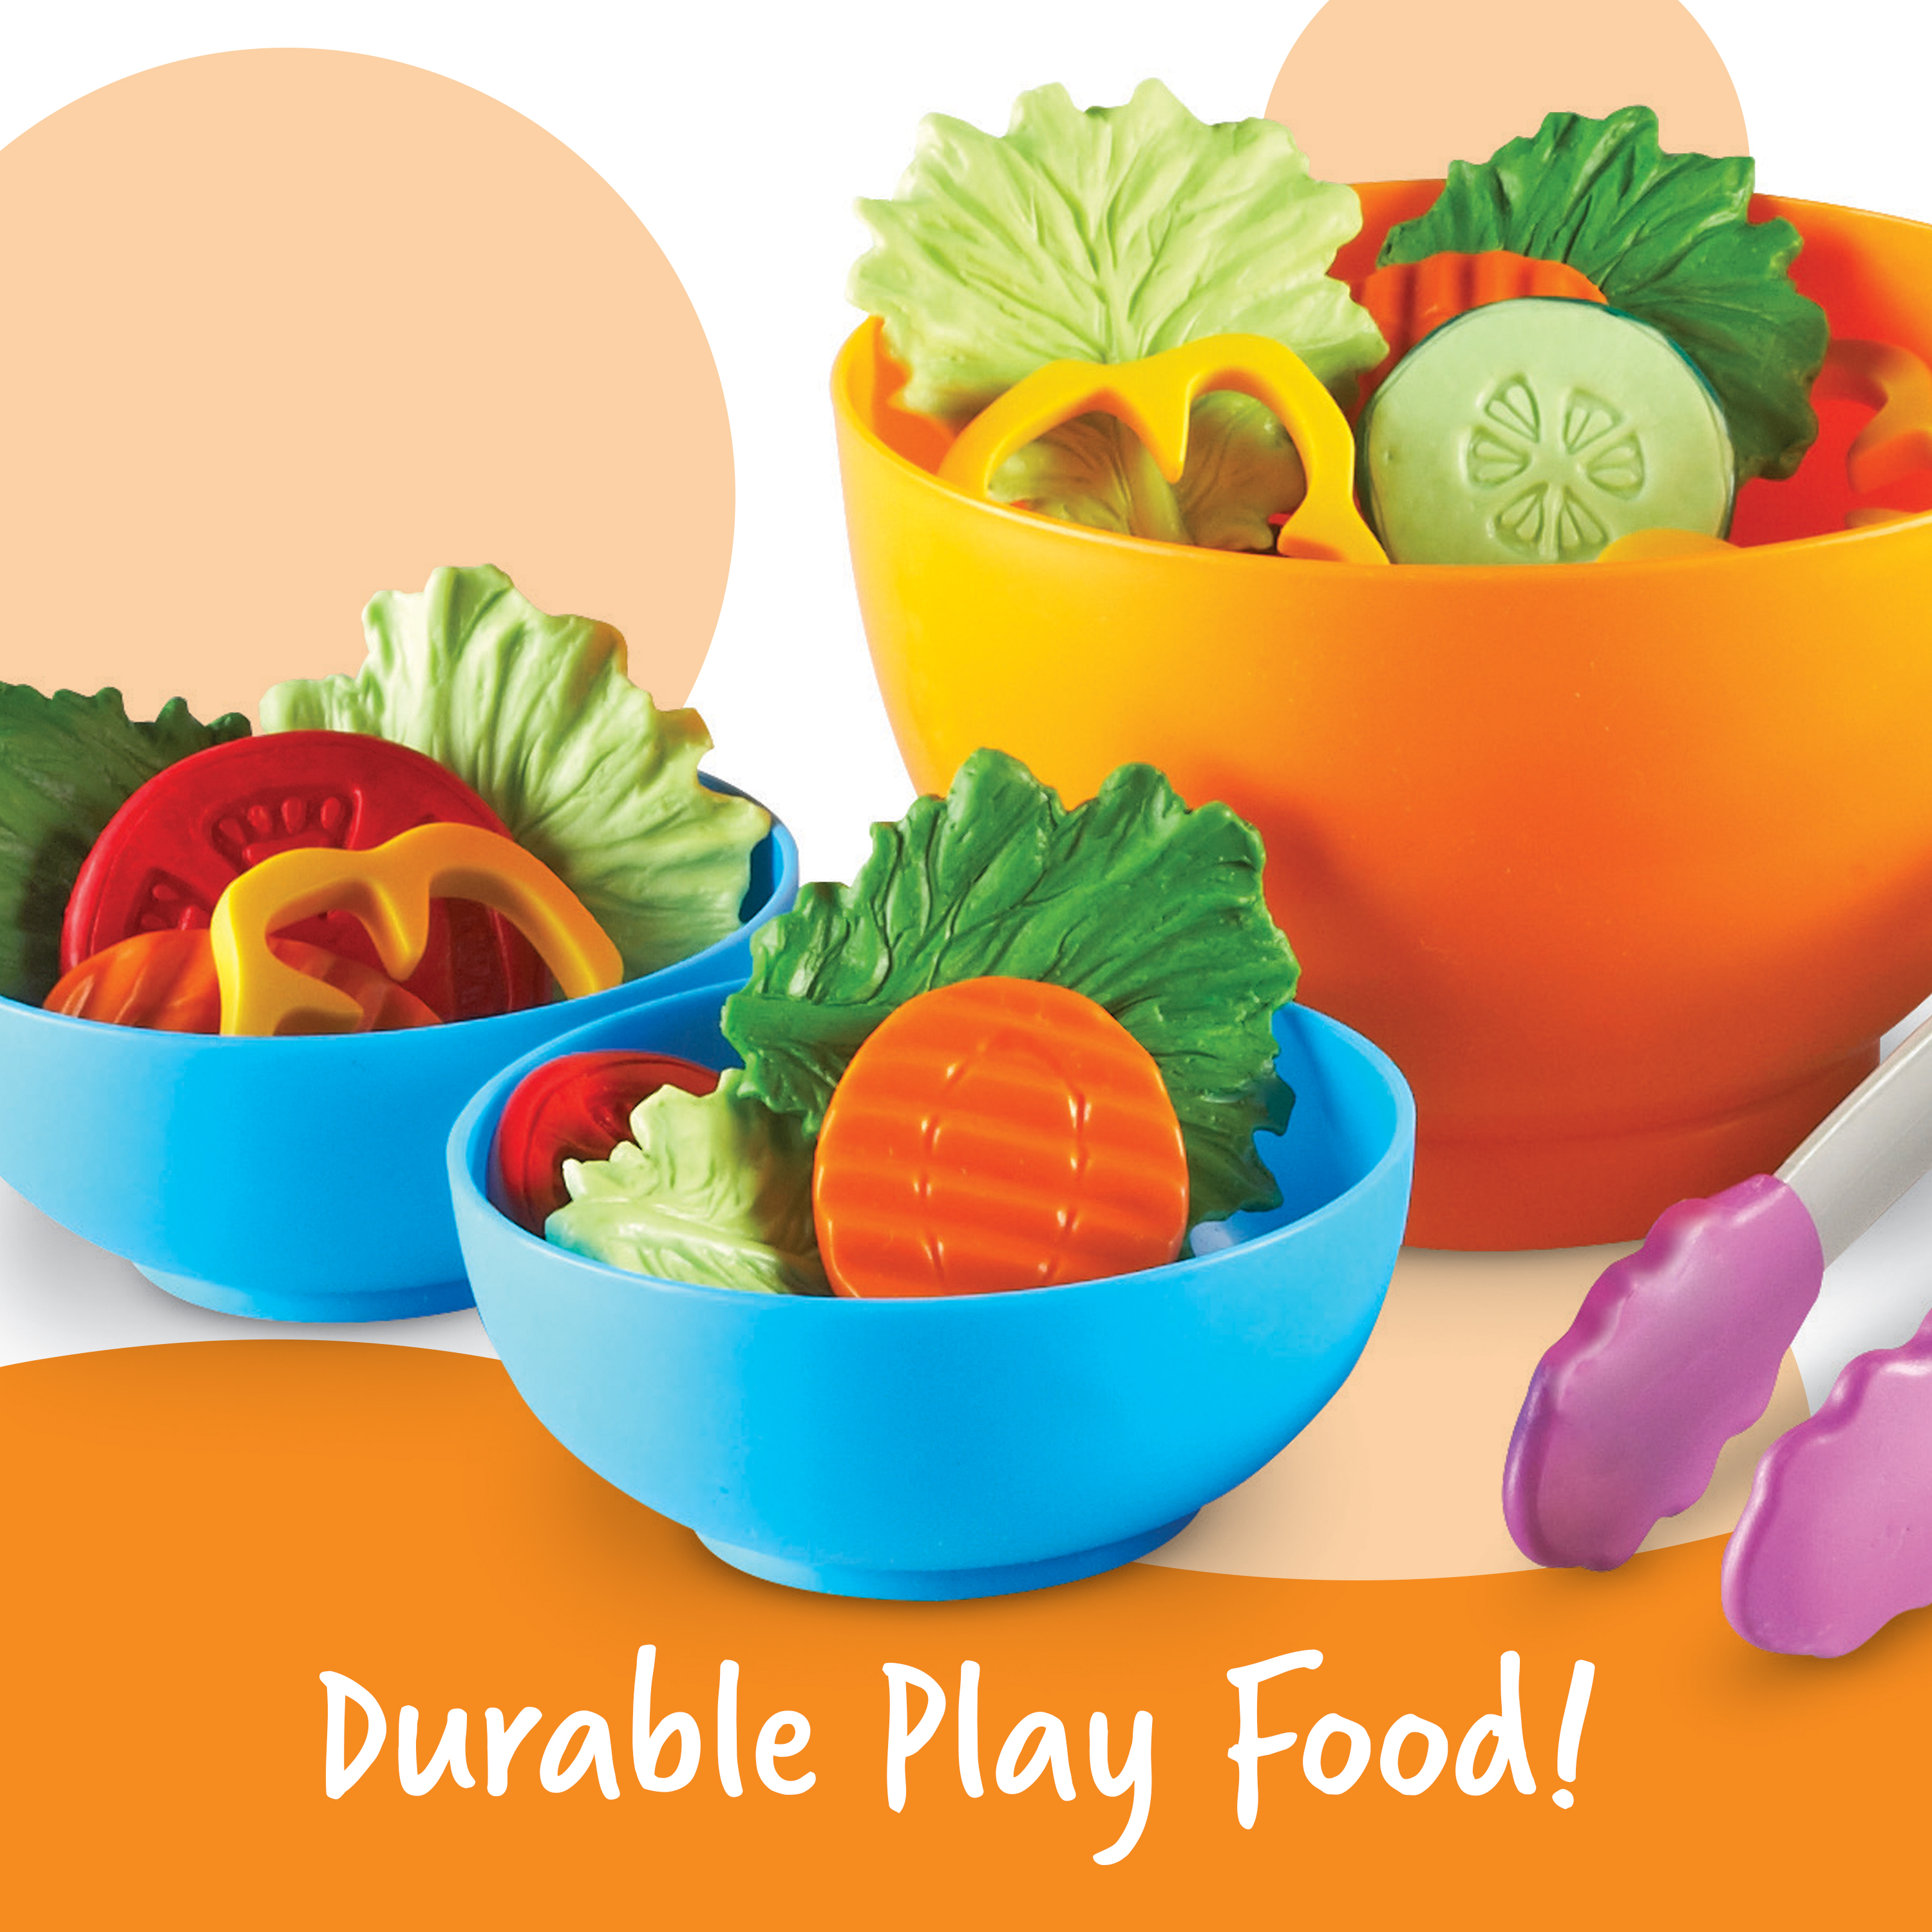 Learning Resources New Sprouts Garden Fresh Salad Playset, Play Pretend Kitchen Activity Preschool Toy for Kids Girls Boys Ages 2 3 4+ Year Old - image 3 of 5